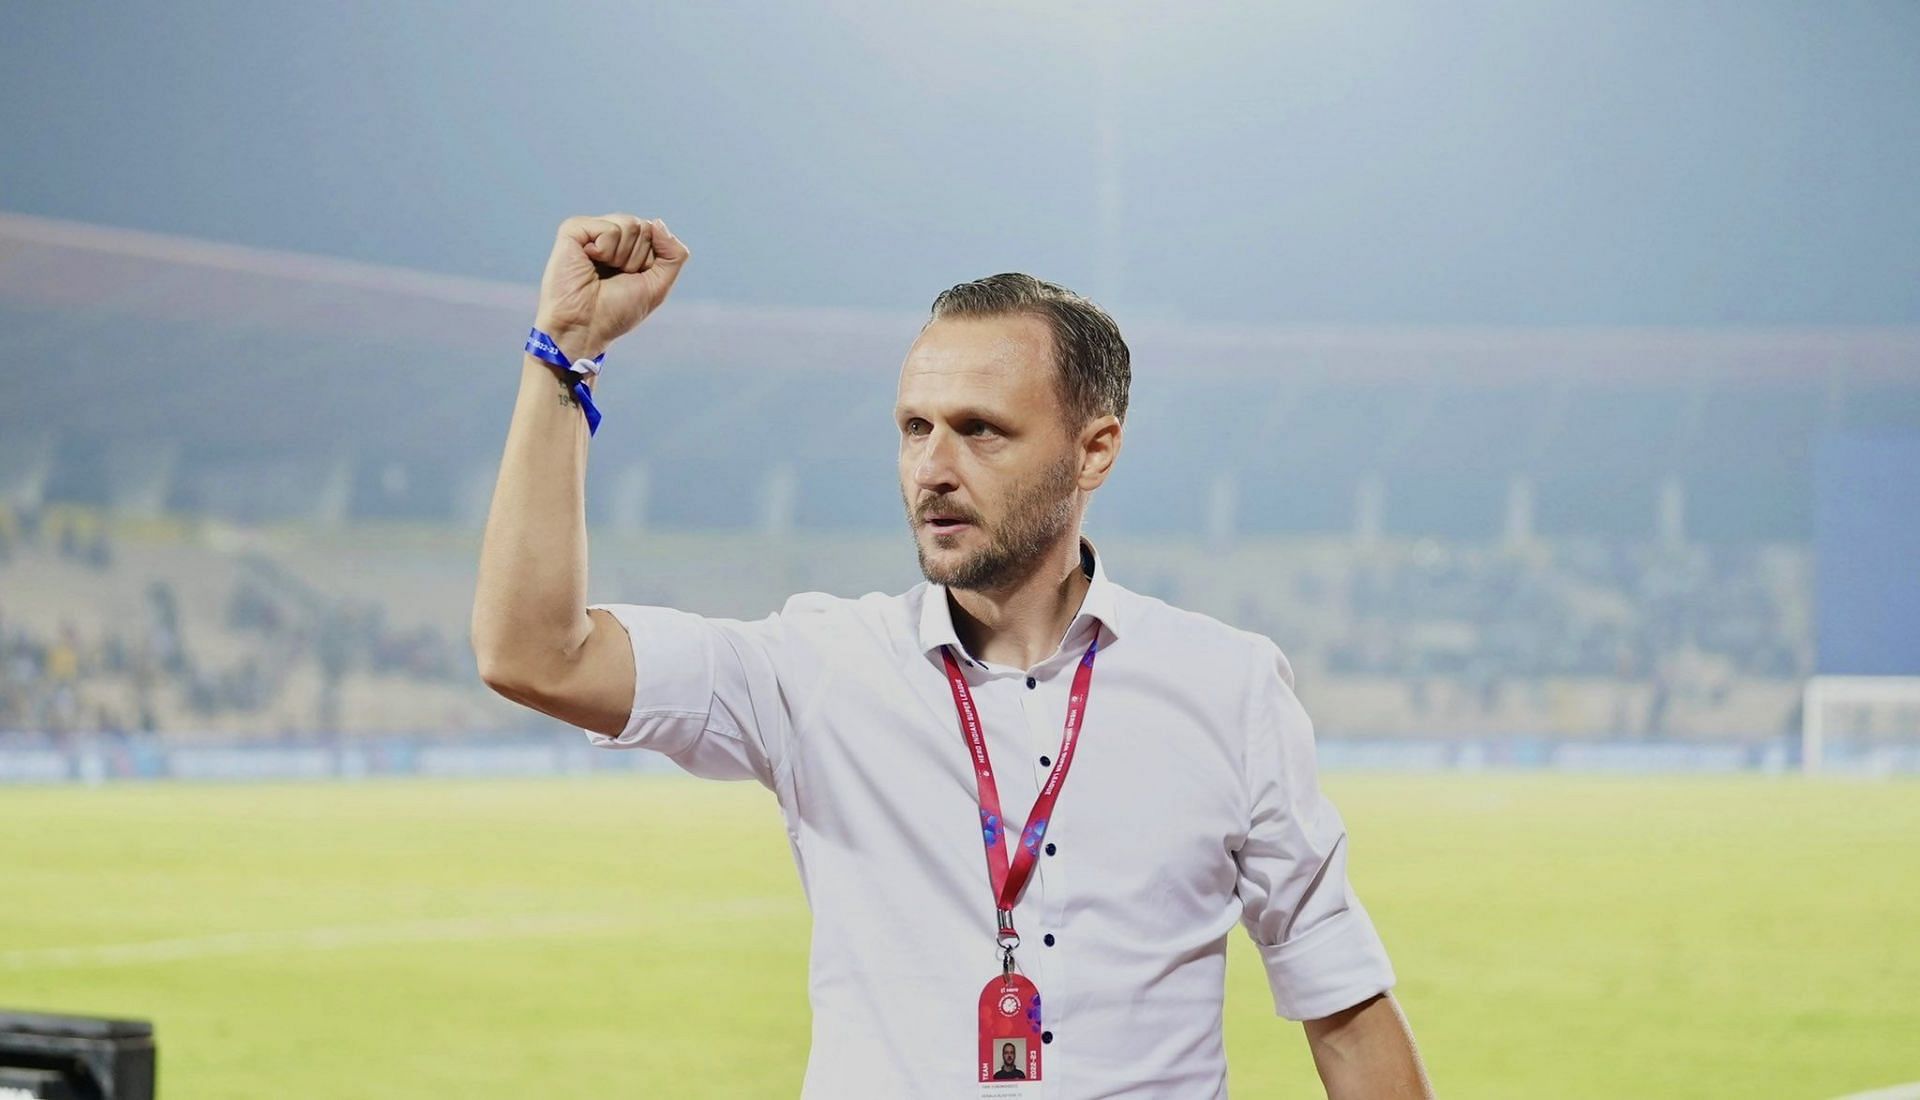 Kerala Blasters FC head coach Ivan Vukomanovic has stated ever since he took over the reigns the team has reached the level where they can bag 30 points each season and qualify for the playoffs